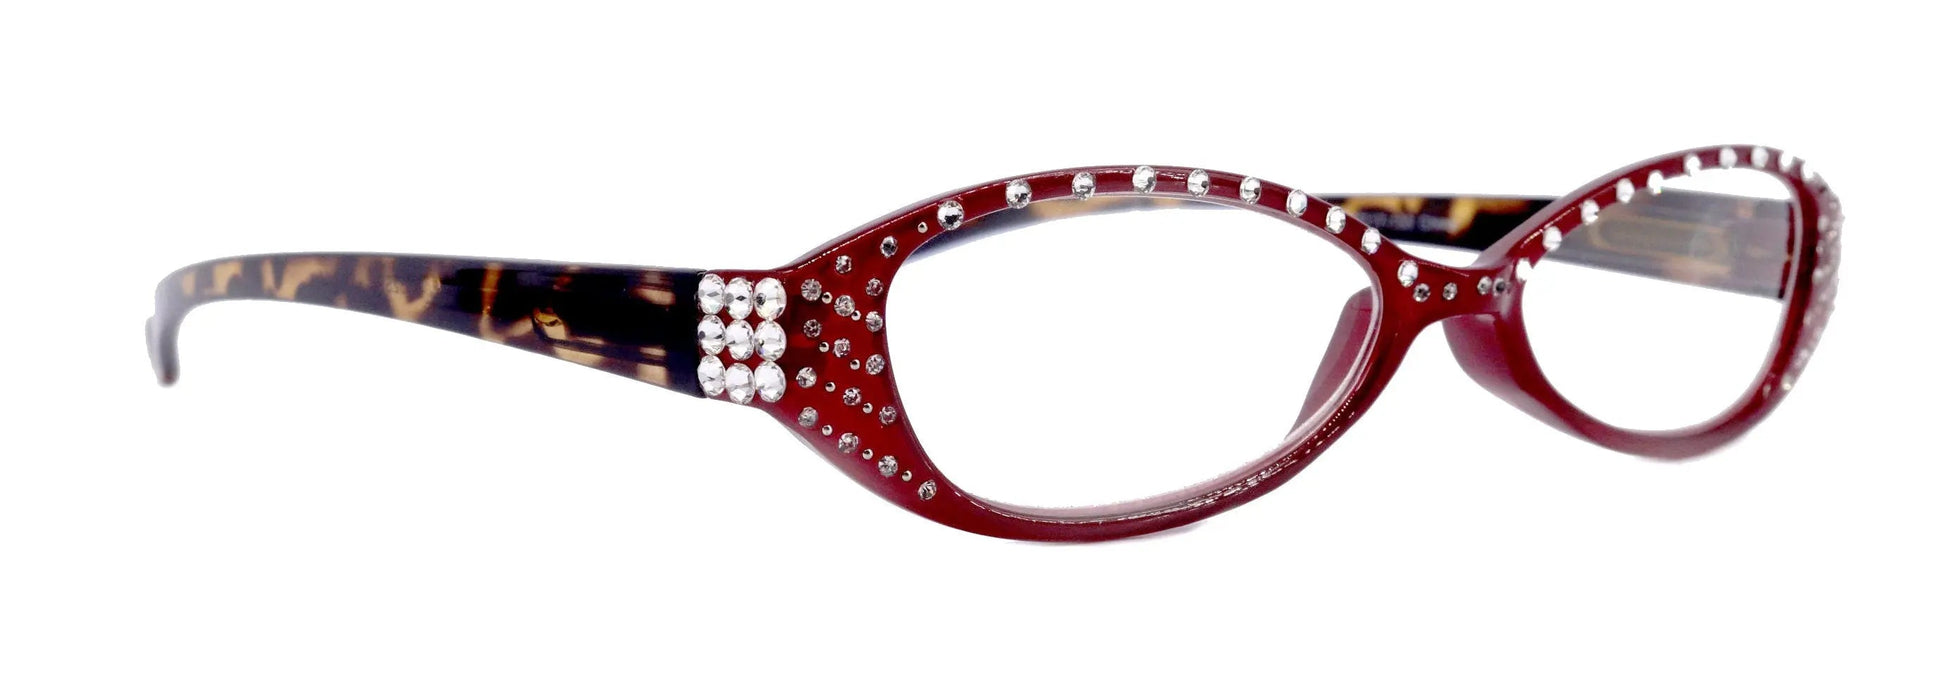 Lucky, (Bling) Women Reading Glasses W (Clear) Genuine European Crystals, Magnifying, Cat Eyes (Red, Tortoise Shell) Cat eye NY Fifth Avenue 